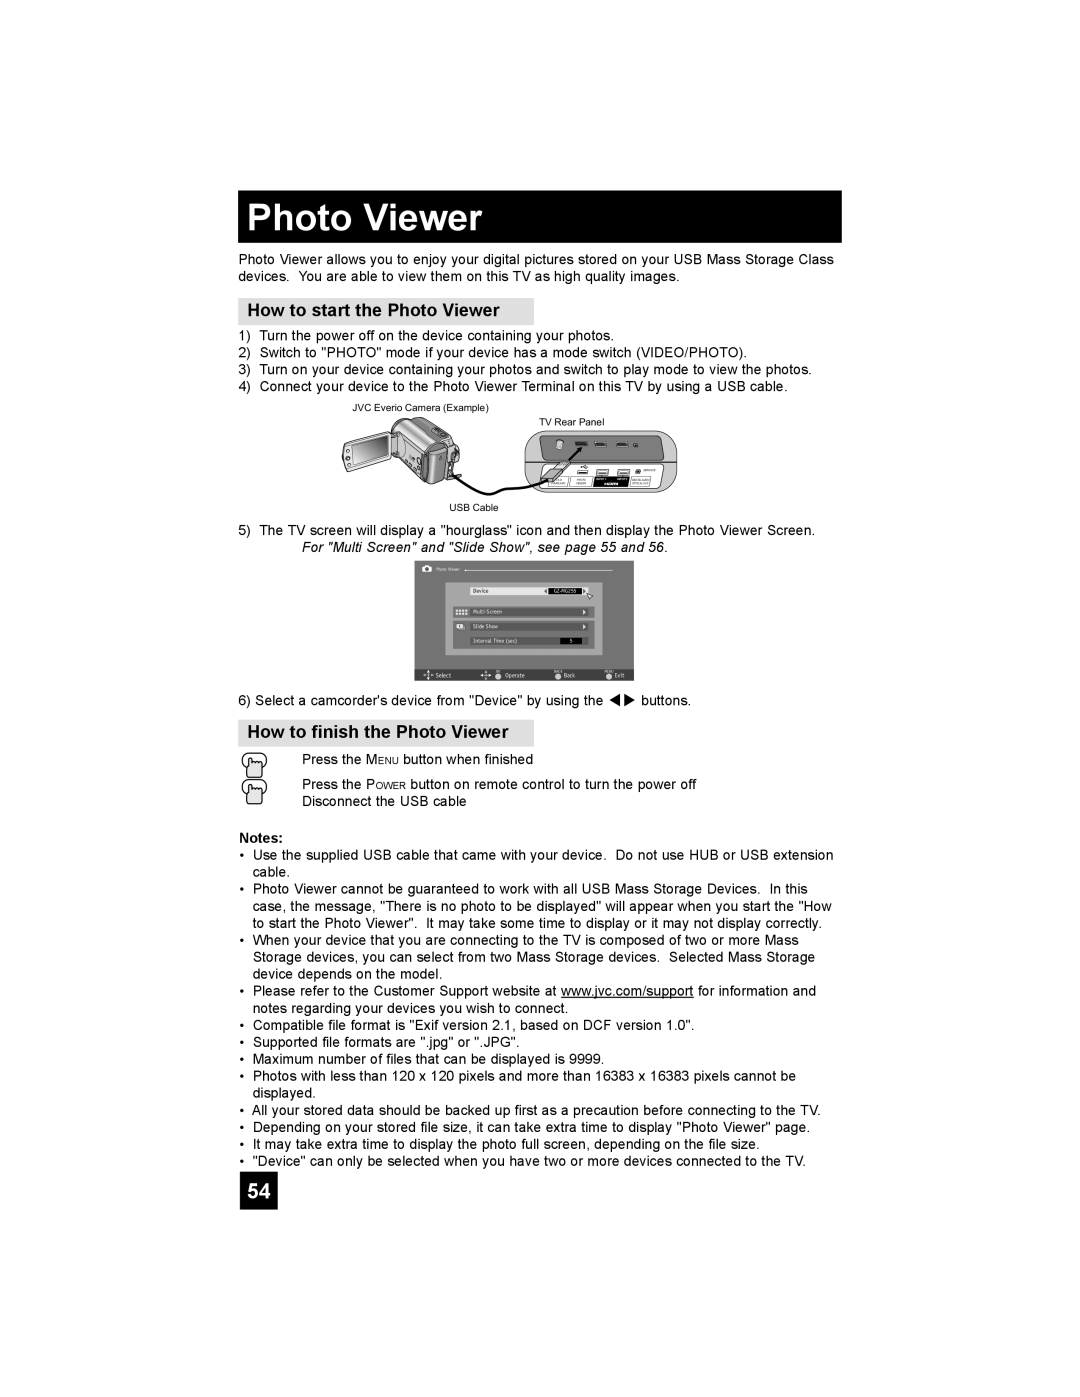 JVC LT-42X688, LT-37X688 manual How to start the Photo Viewer, How to finish the Photo Viewer 